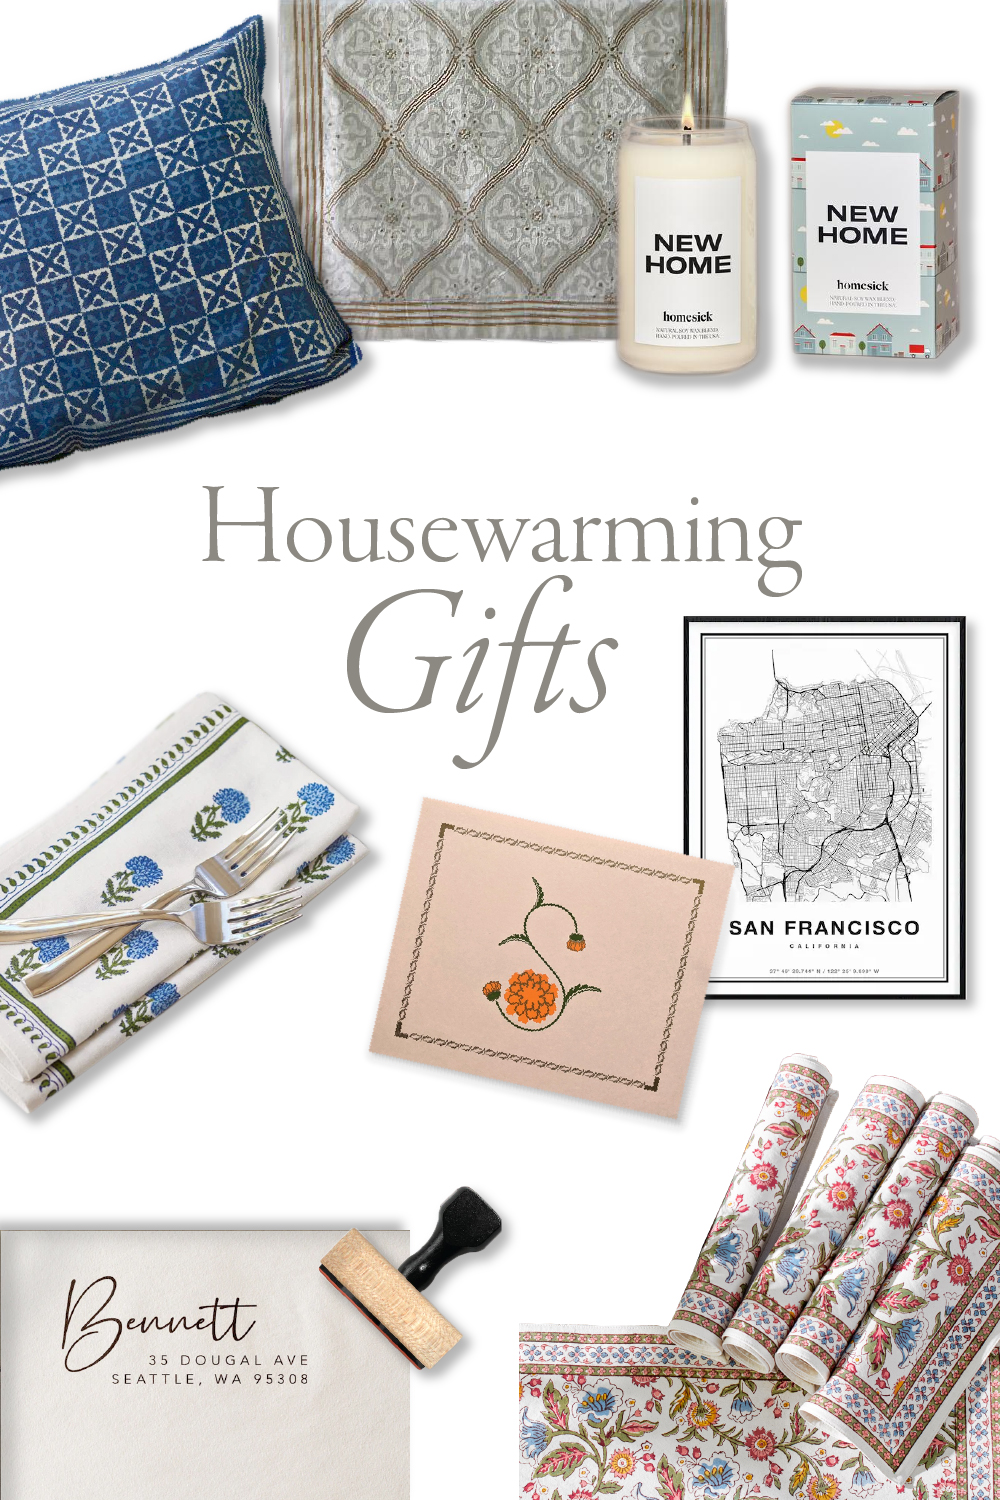 Housewarming Gift Ideas that'll Leave the Host Mesmerised